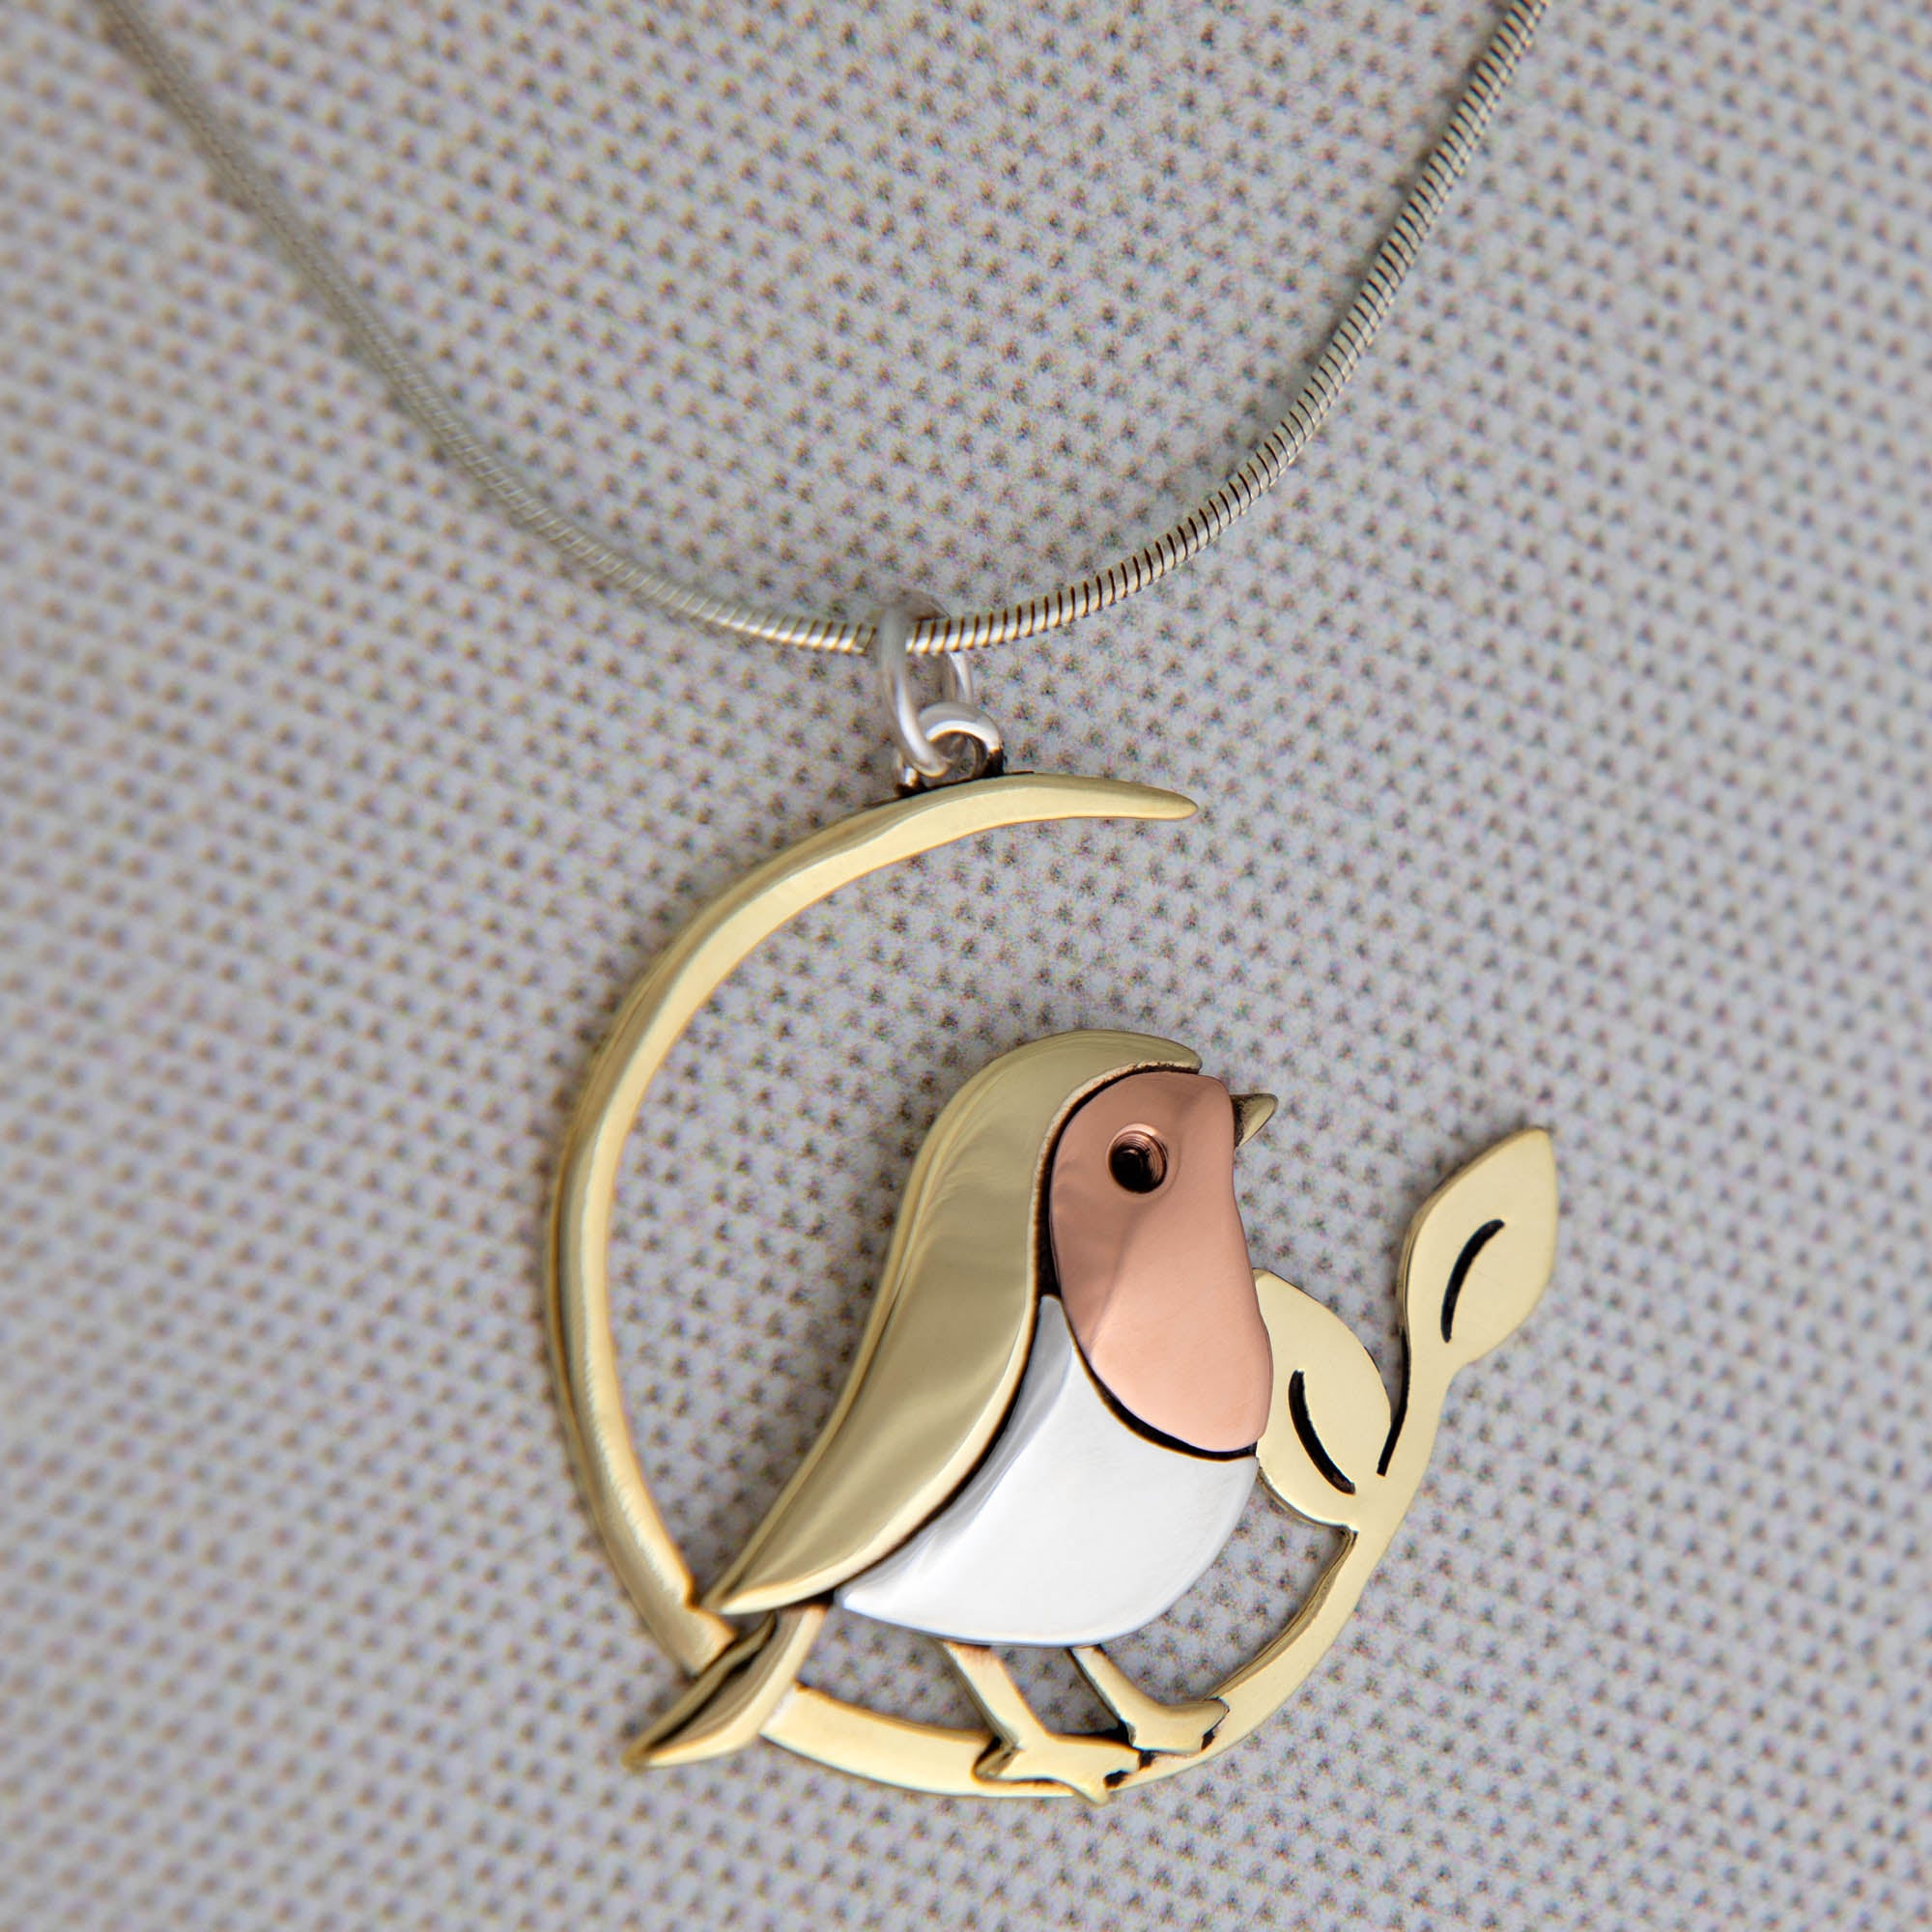 Standing Bird Sterling Necklace